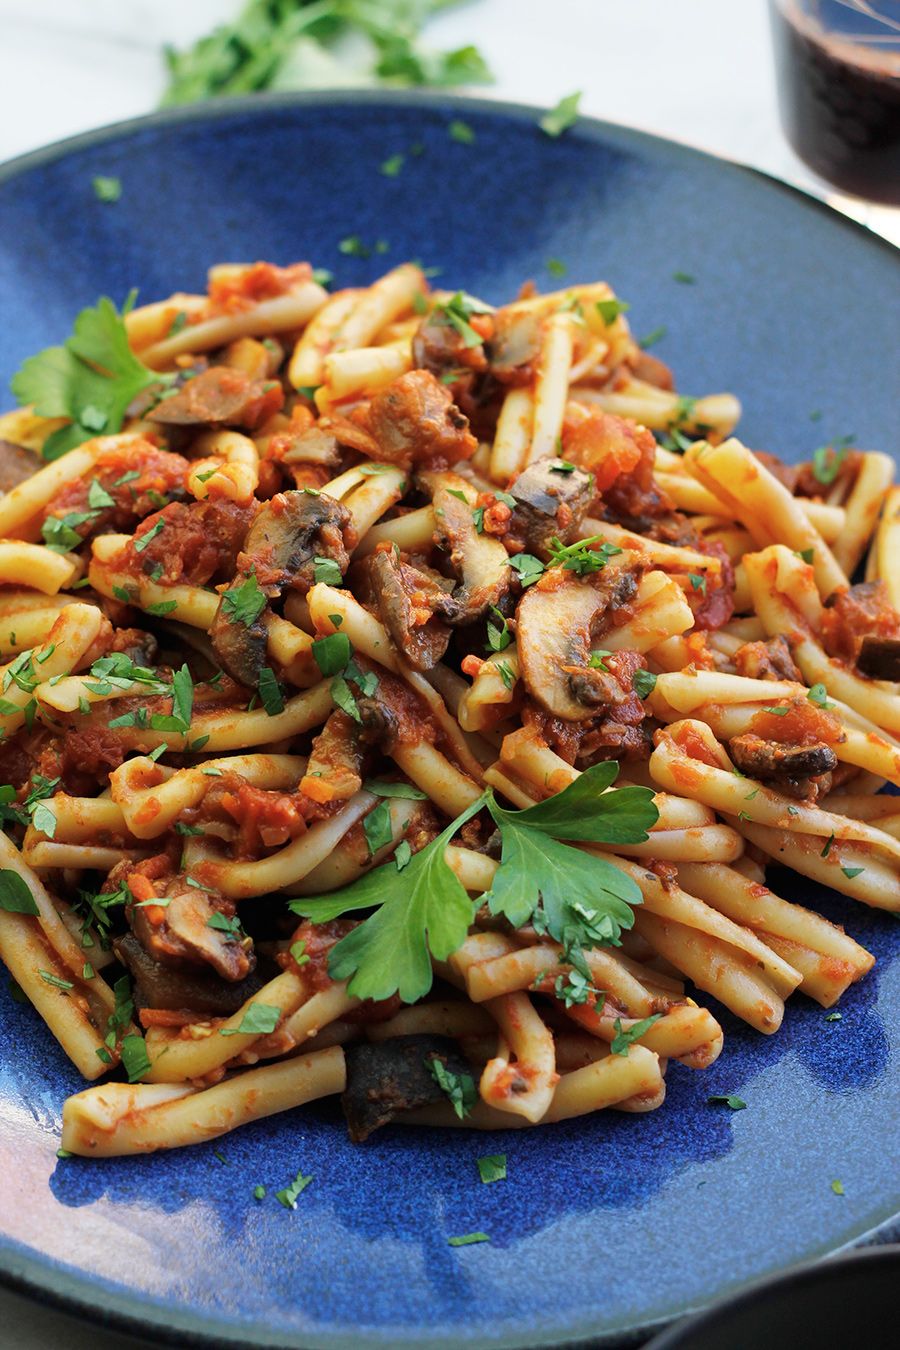 Close-up of blue plate filled with Vegan Eggplant Mushroom Bolognese Sauce tossed with Casarecce pasta.